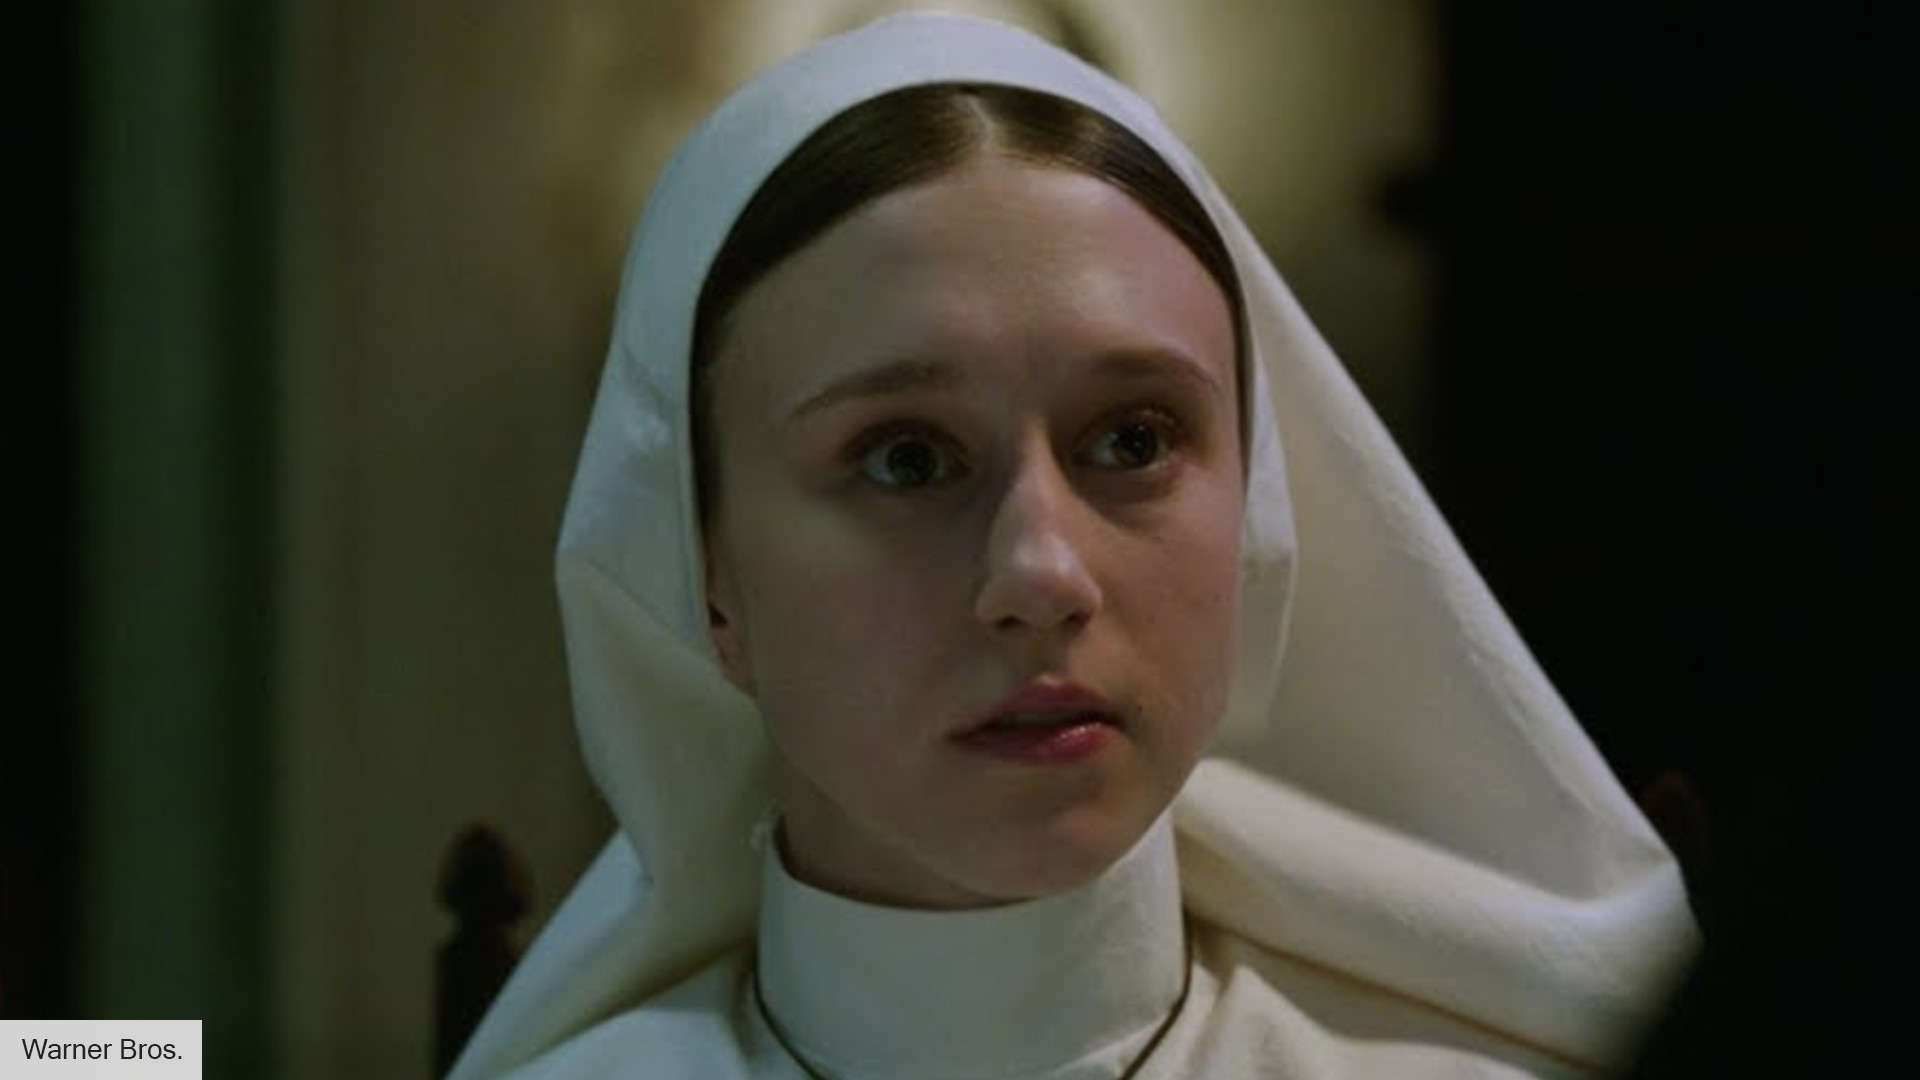 The Nun 2 cast, plot, trailer, reviews, release date, and more